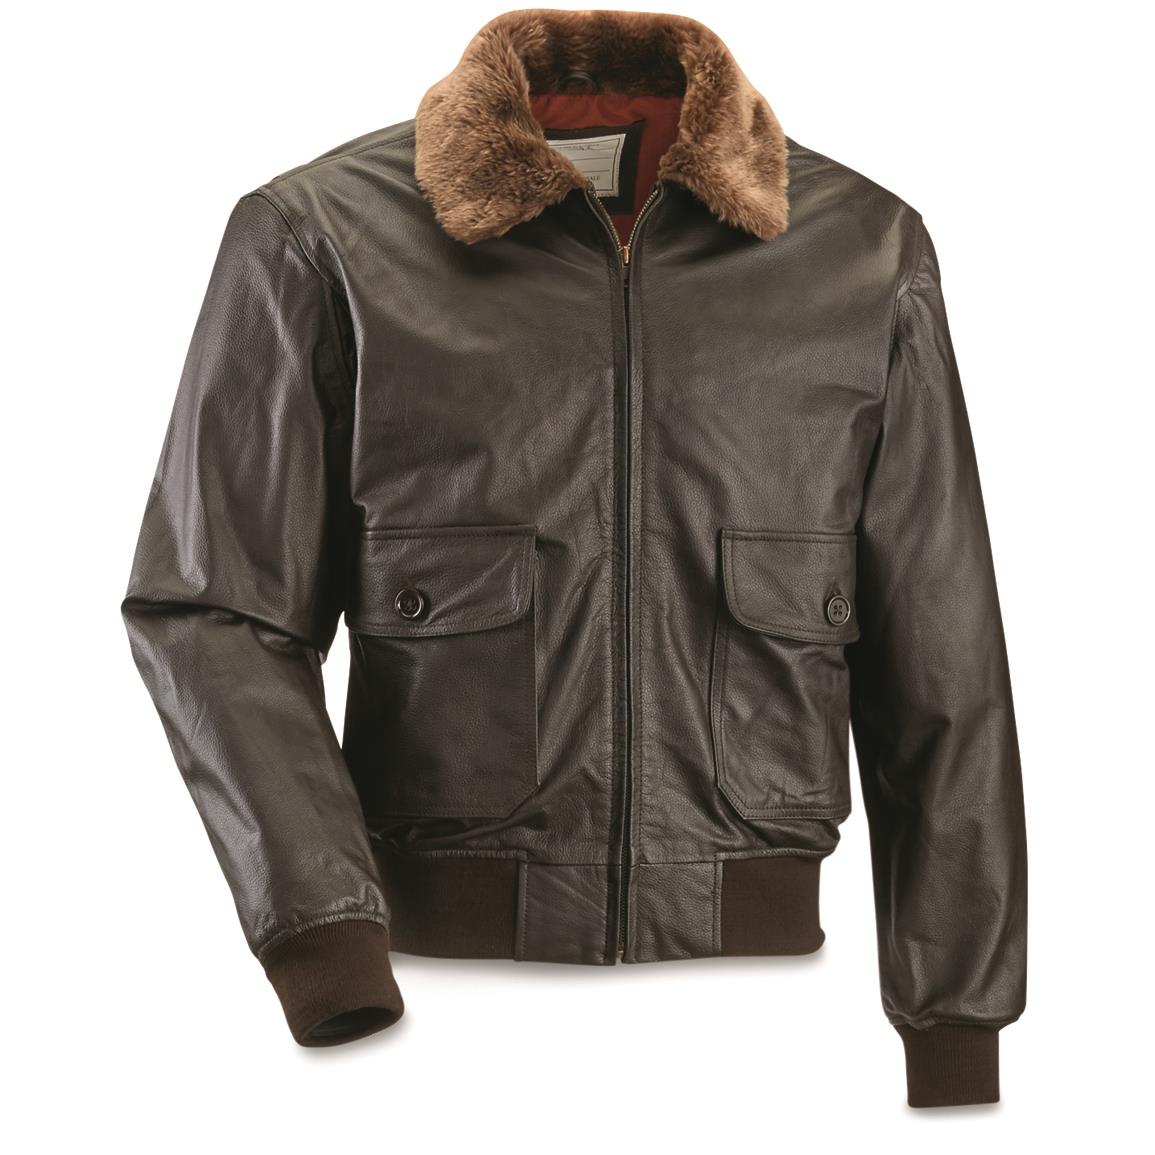 Reproduction U.S. Navy G1 Leather Flight Jacket, Brown